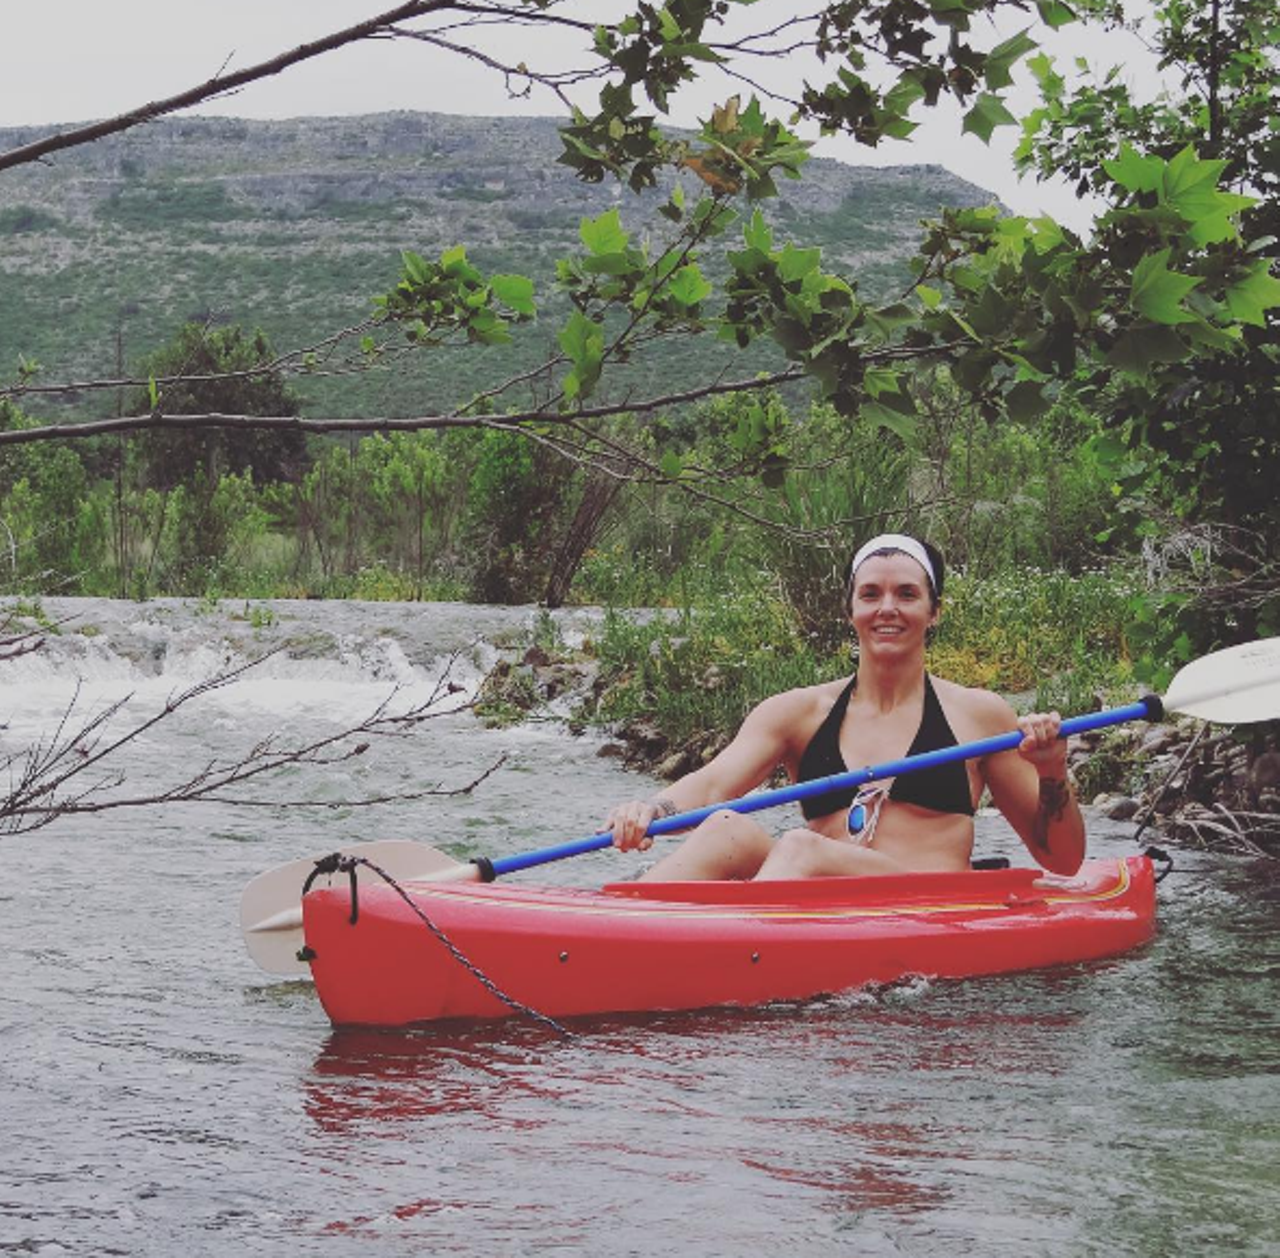 Nueces River 
Stretching over 300 miles long, the Nueces rises northwest of San Antonio and flows through the Hill Country, ending at the Corpus Christi Bay. It's a great spot for a weekend trip on the water or you can make a trip to Uvalde for a quick escape. 
Photo via Instagram (imperfect_athlete)